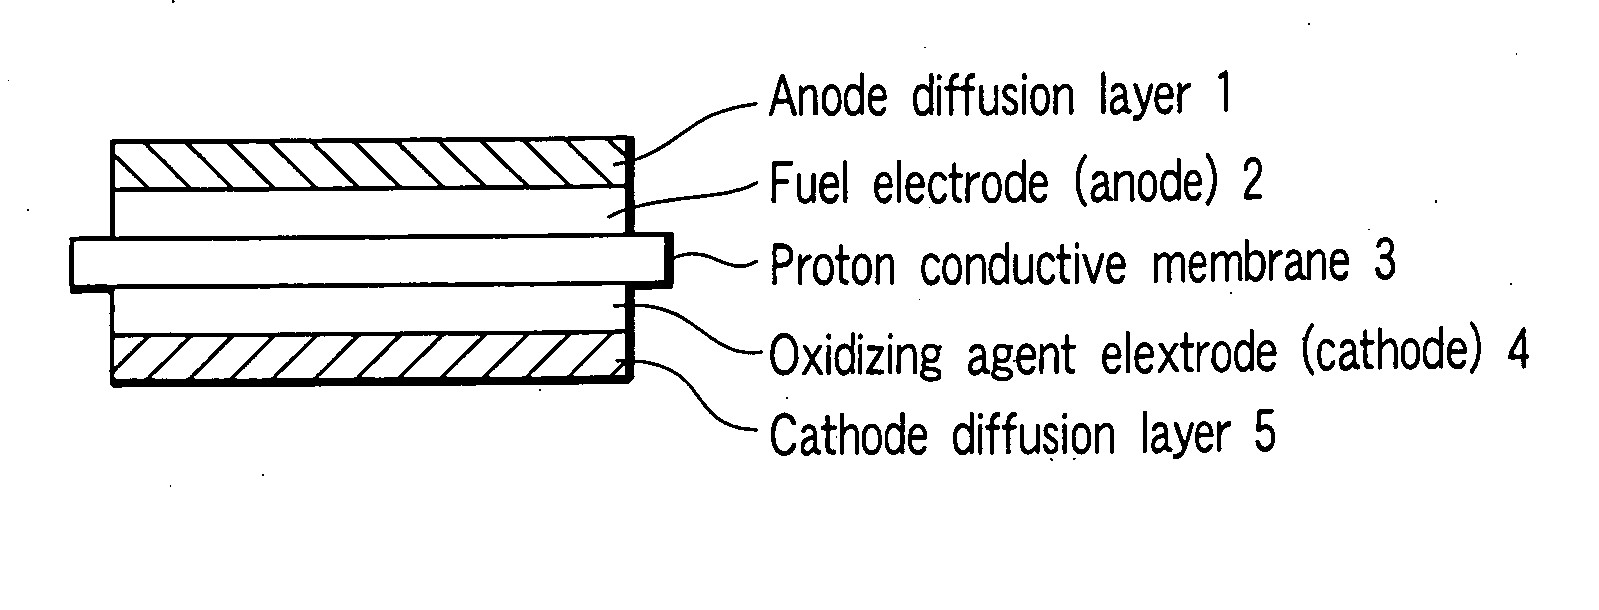 Liquid fuel cell, membrane electrode assembly and cathode